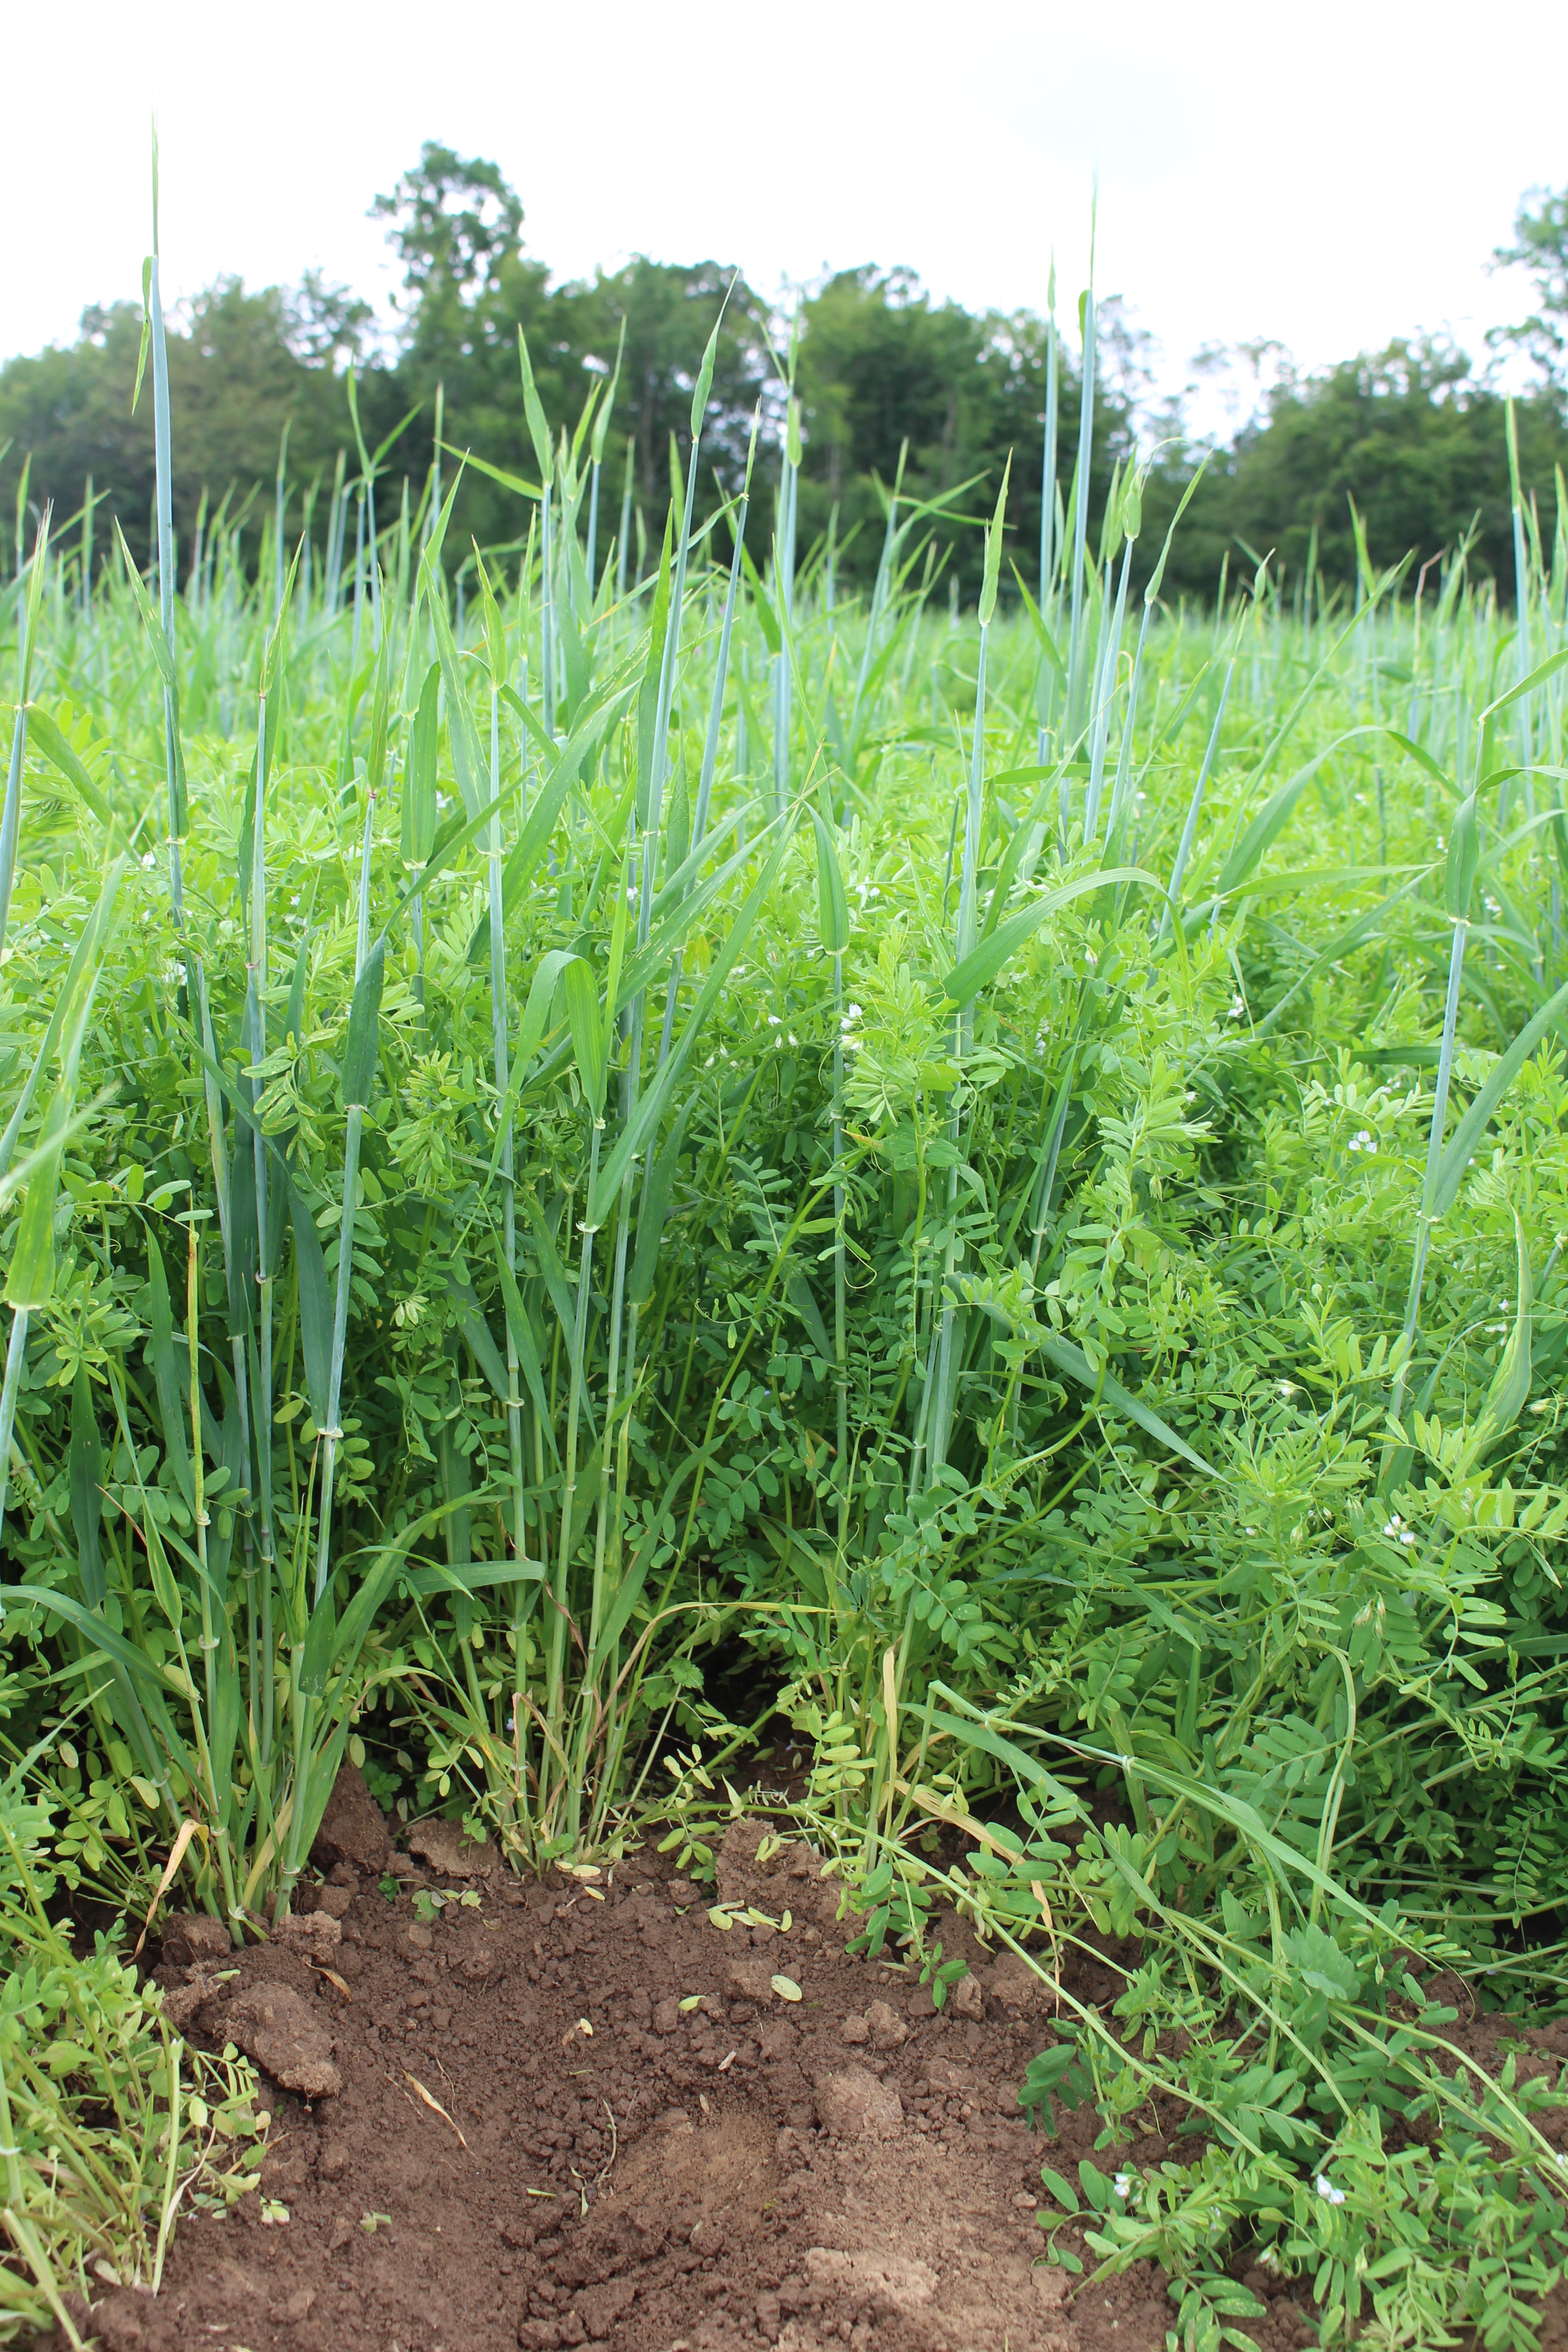 The photo shows a field with lentil and barley plants.